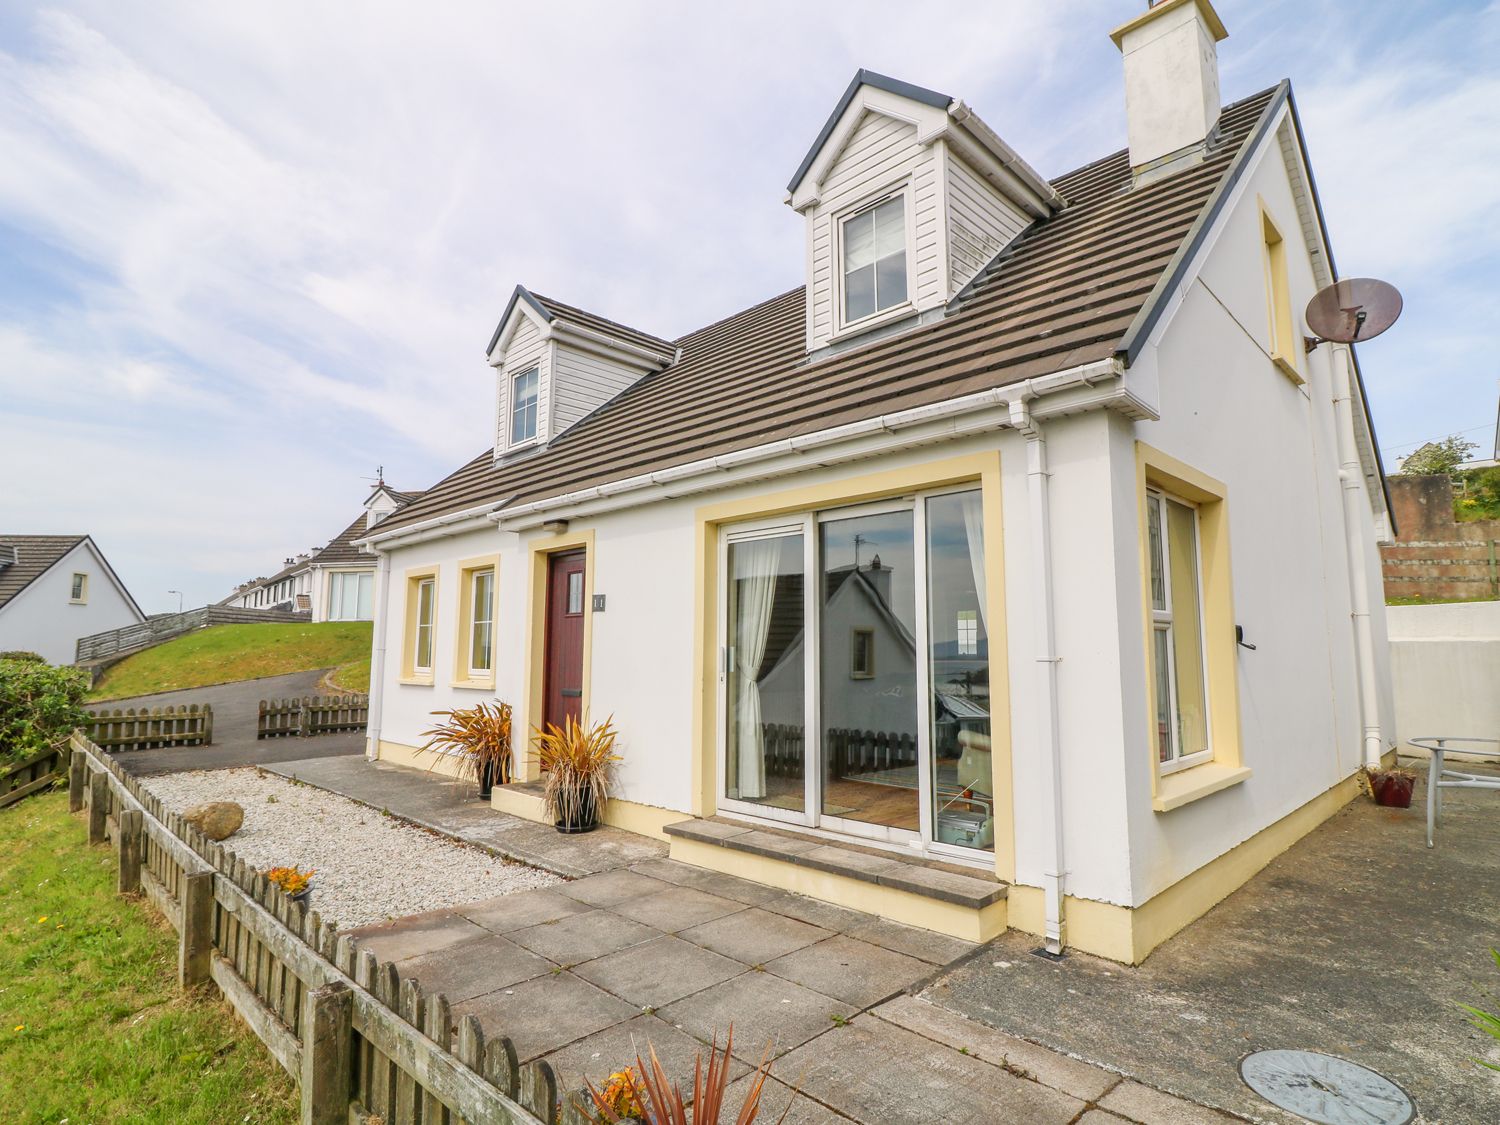 11 Ocean View - County Donegal - 1011066 - photo 1